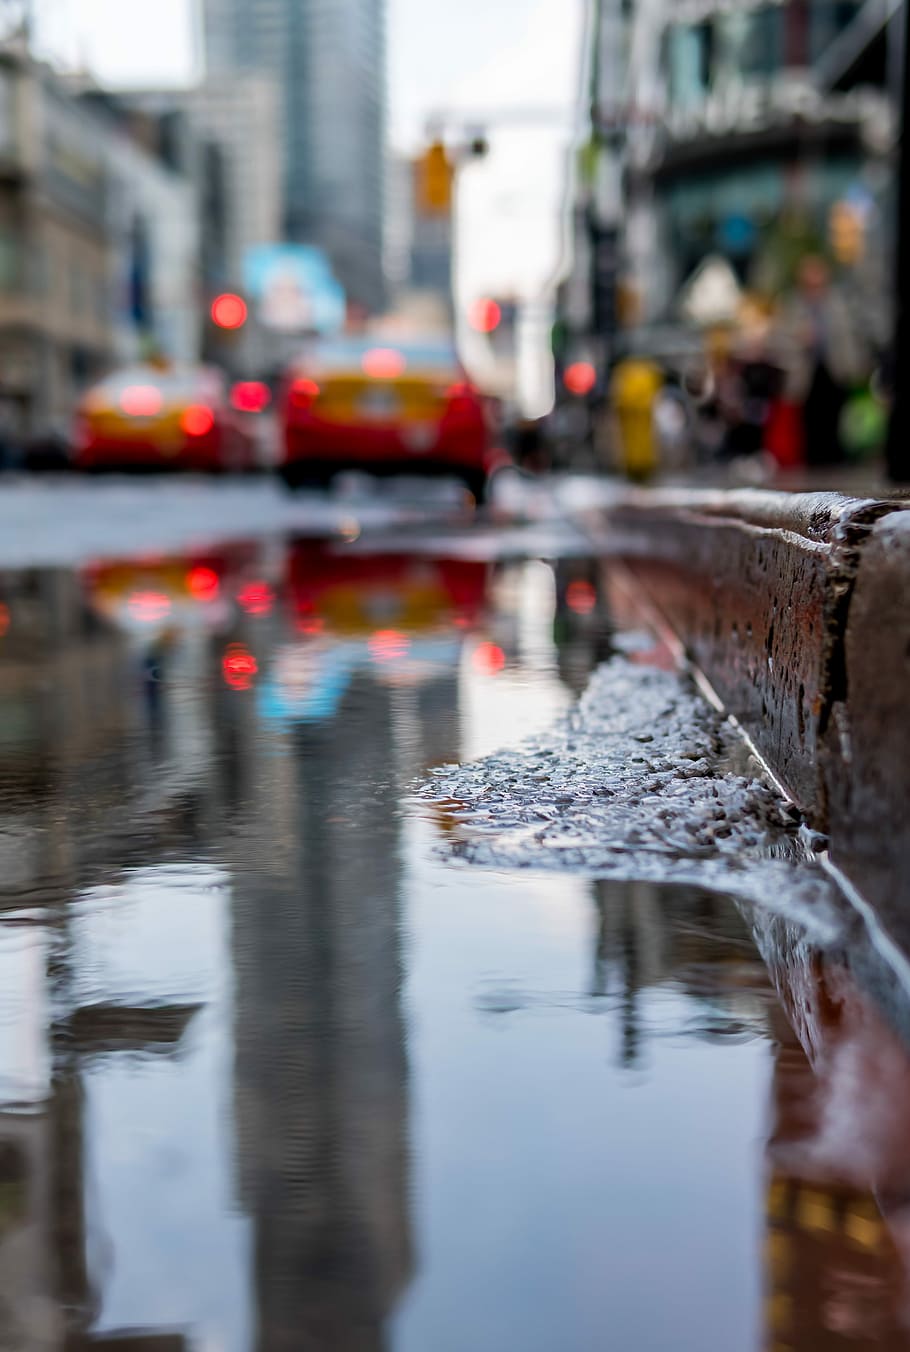 After the rain, water puddle near curb, road, street, reflection